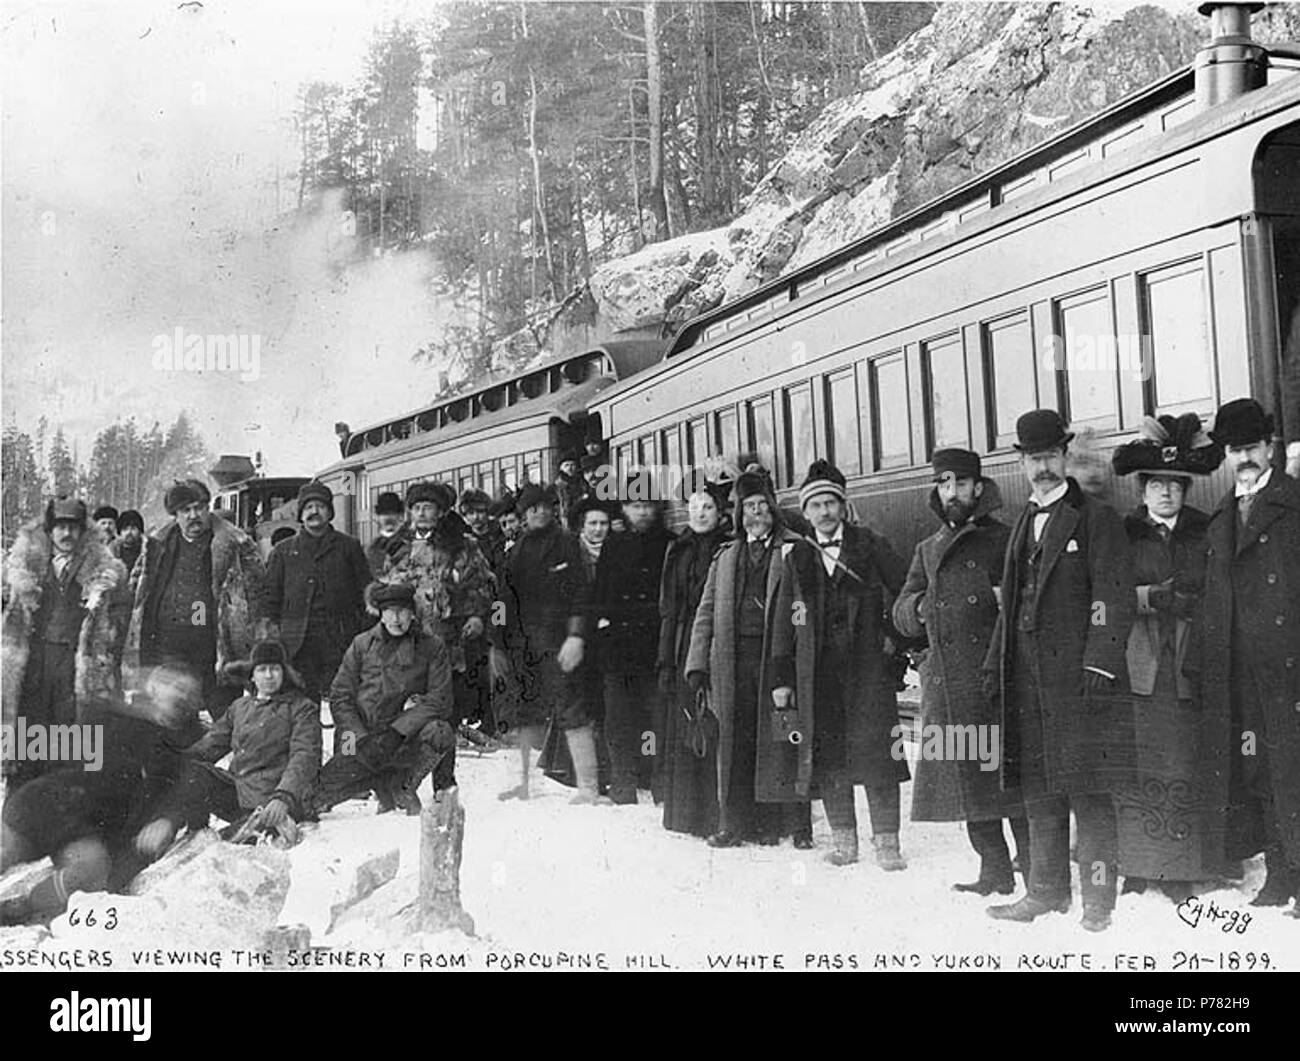 . English: Passengers disembarking from the White Pass & Yukon Railroad to view scenery from Porcupine Hill, Alaska, February 20, 1899. English: Caption on image: 'Passengers viewing scenery from Porcupine Hill. White Pass and Yukon Route. Feb 20 1899.' Original image in Hegg Album 2, page 36. Subjects (LCTGM): Railroads--Alaska--Porcupine Hill; Mountains--Alaska; Passengers--Alaska Subjects (LCSH): White Pass & Yukon Route (Firm); Porcupine Hill (Alaska); Portraits, Group--Alaska--Porcupine Hill  . 1899 10 Passengers disembarking from the White Pass &amp; Yukon Railroad to view scenery from P Stock Photo